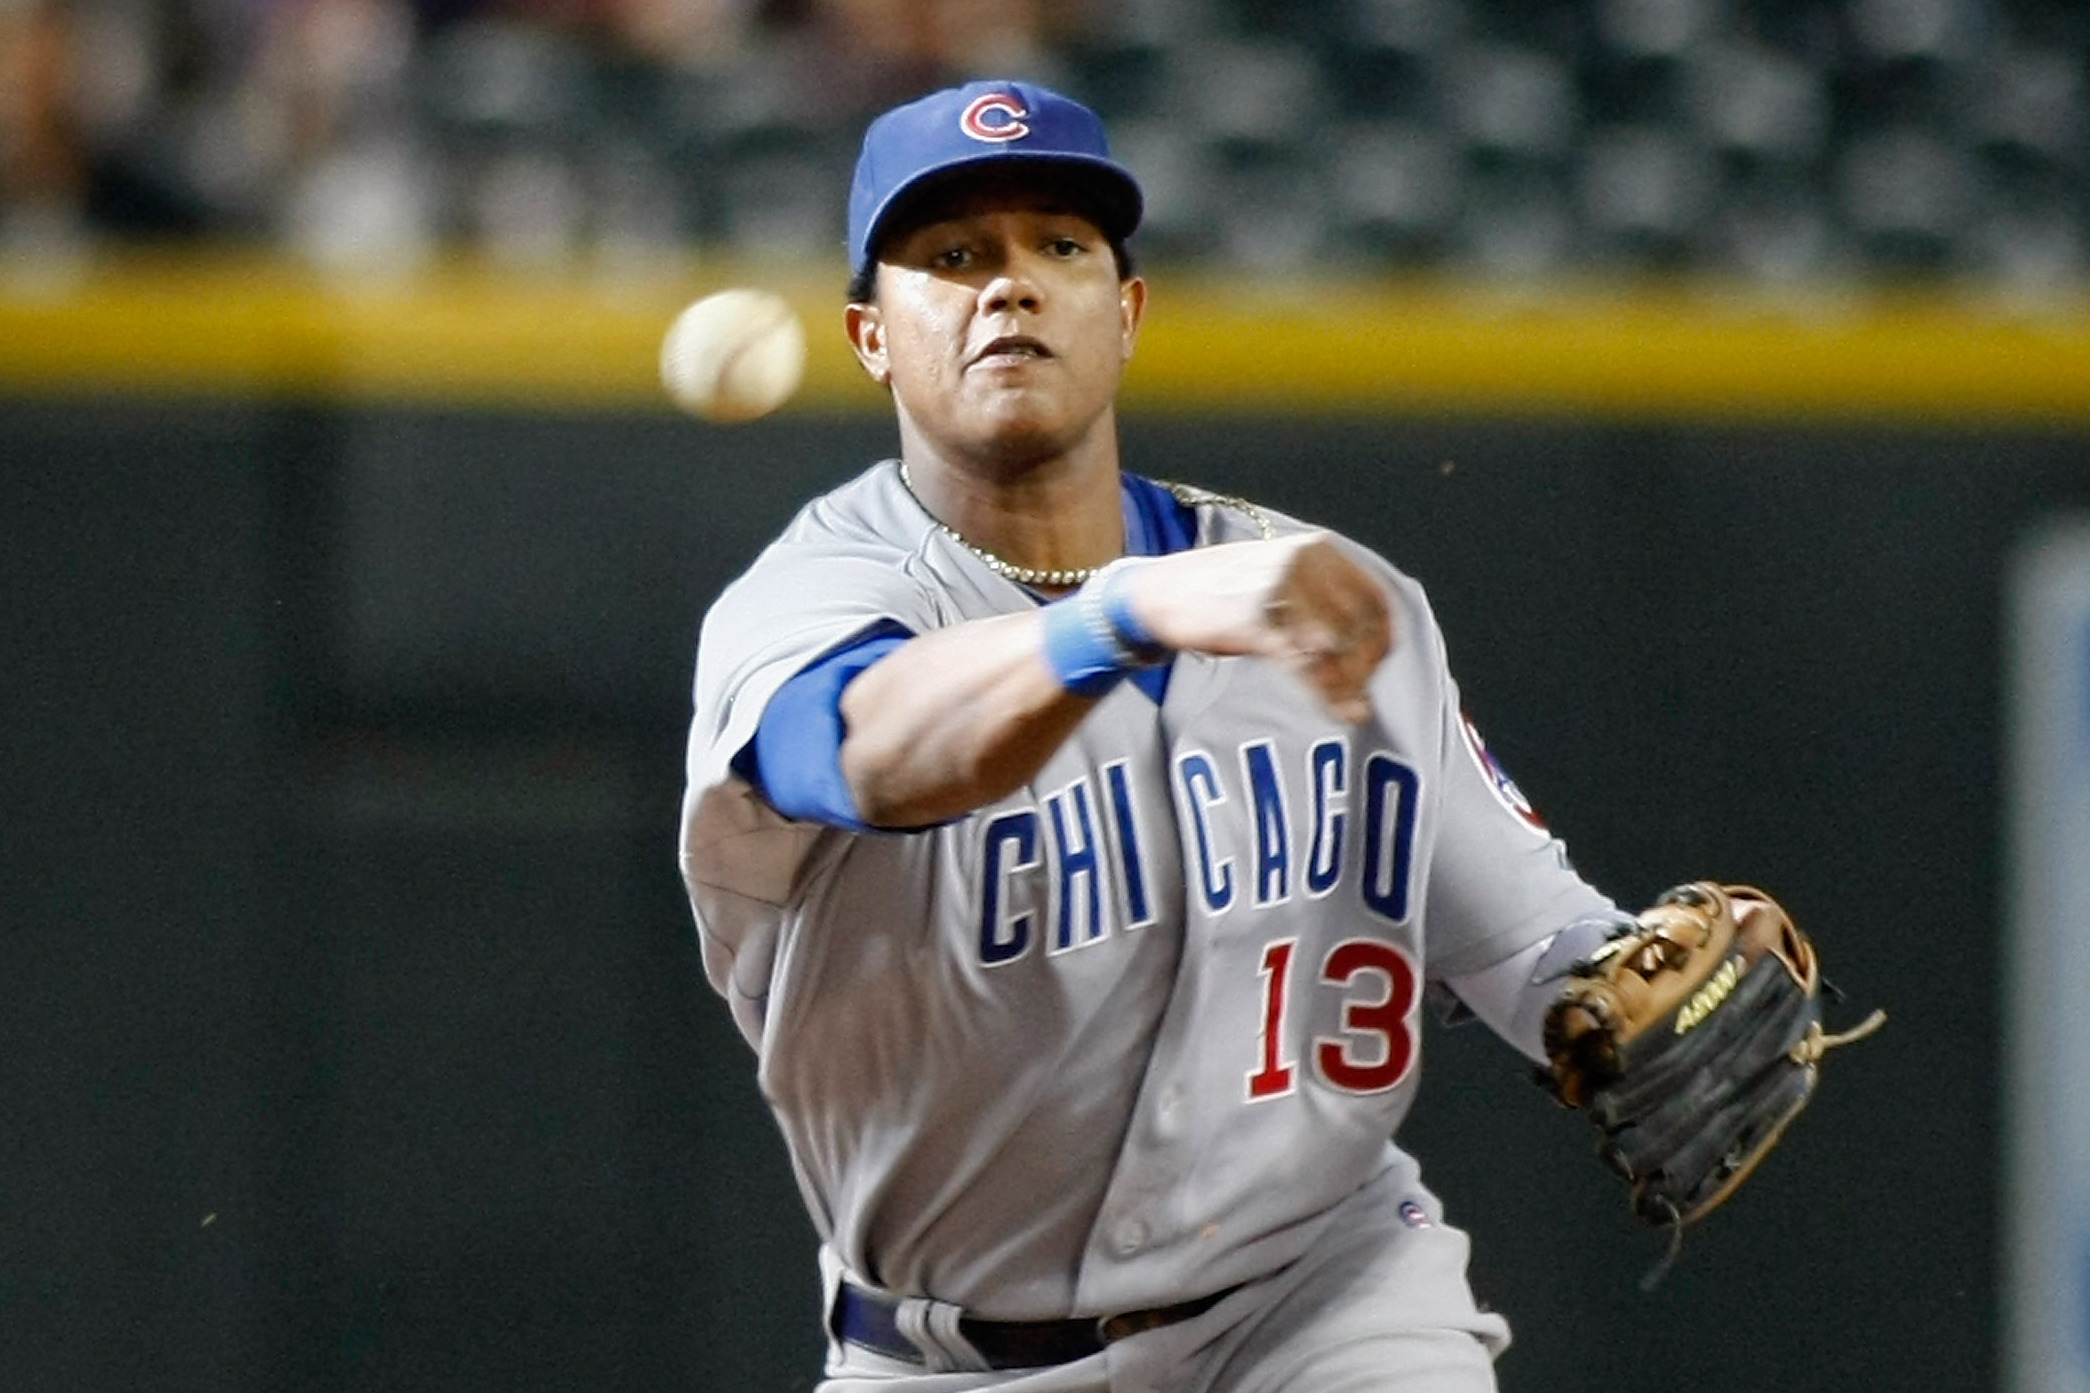 MLB local ties: Darwin Barney goes 2-for-4 in Chicago Cubs opening day loss  